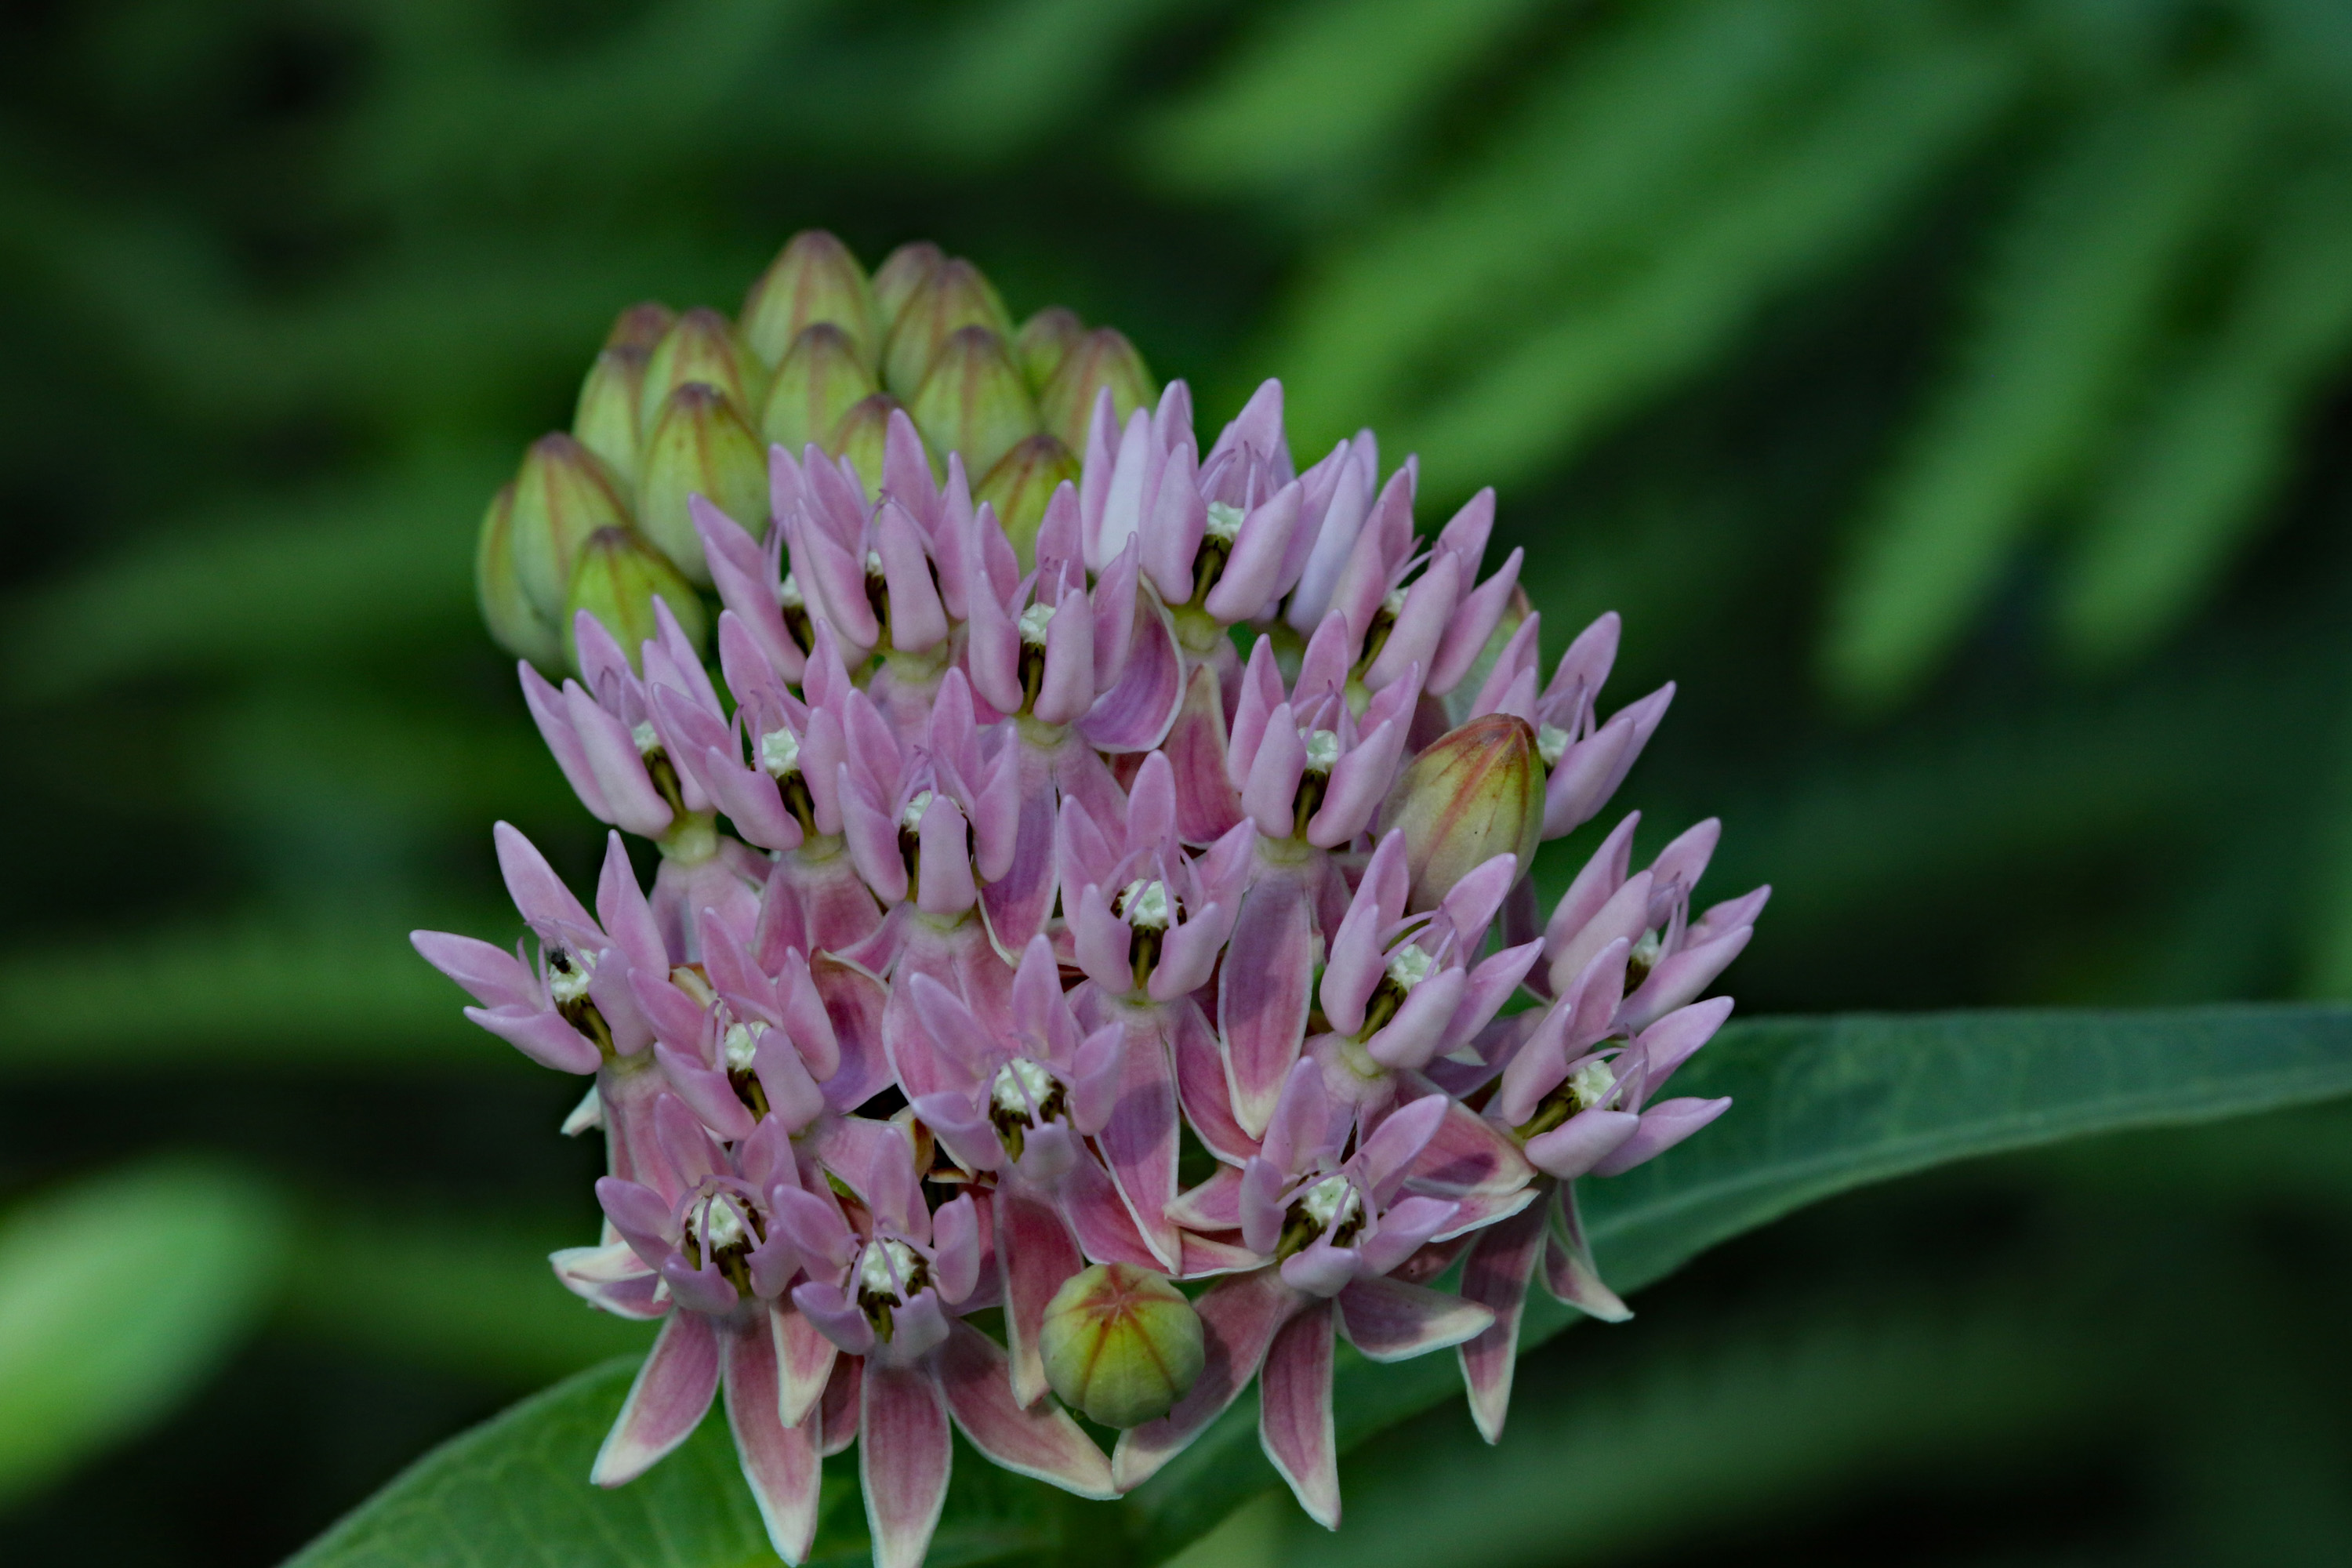 The Scientific Name is Asclepias rubra. You will likely hear them called Purple Savana Milkweed, Red Milkweed. This picture shows the I find Purple Savannah Milkweed in streamheads in the sandhills.  Blossoms are a handsome pale pink-purple.  of Asclepias rubra